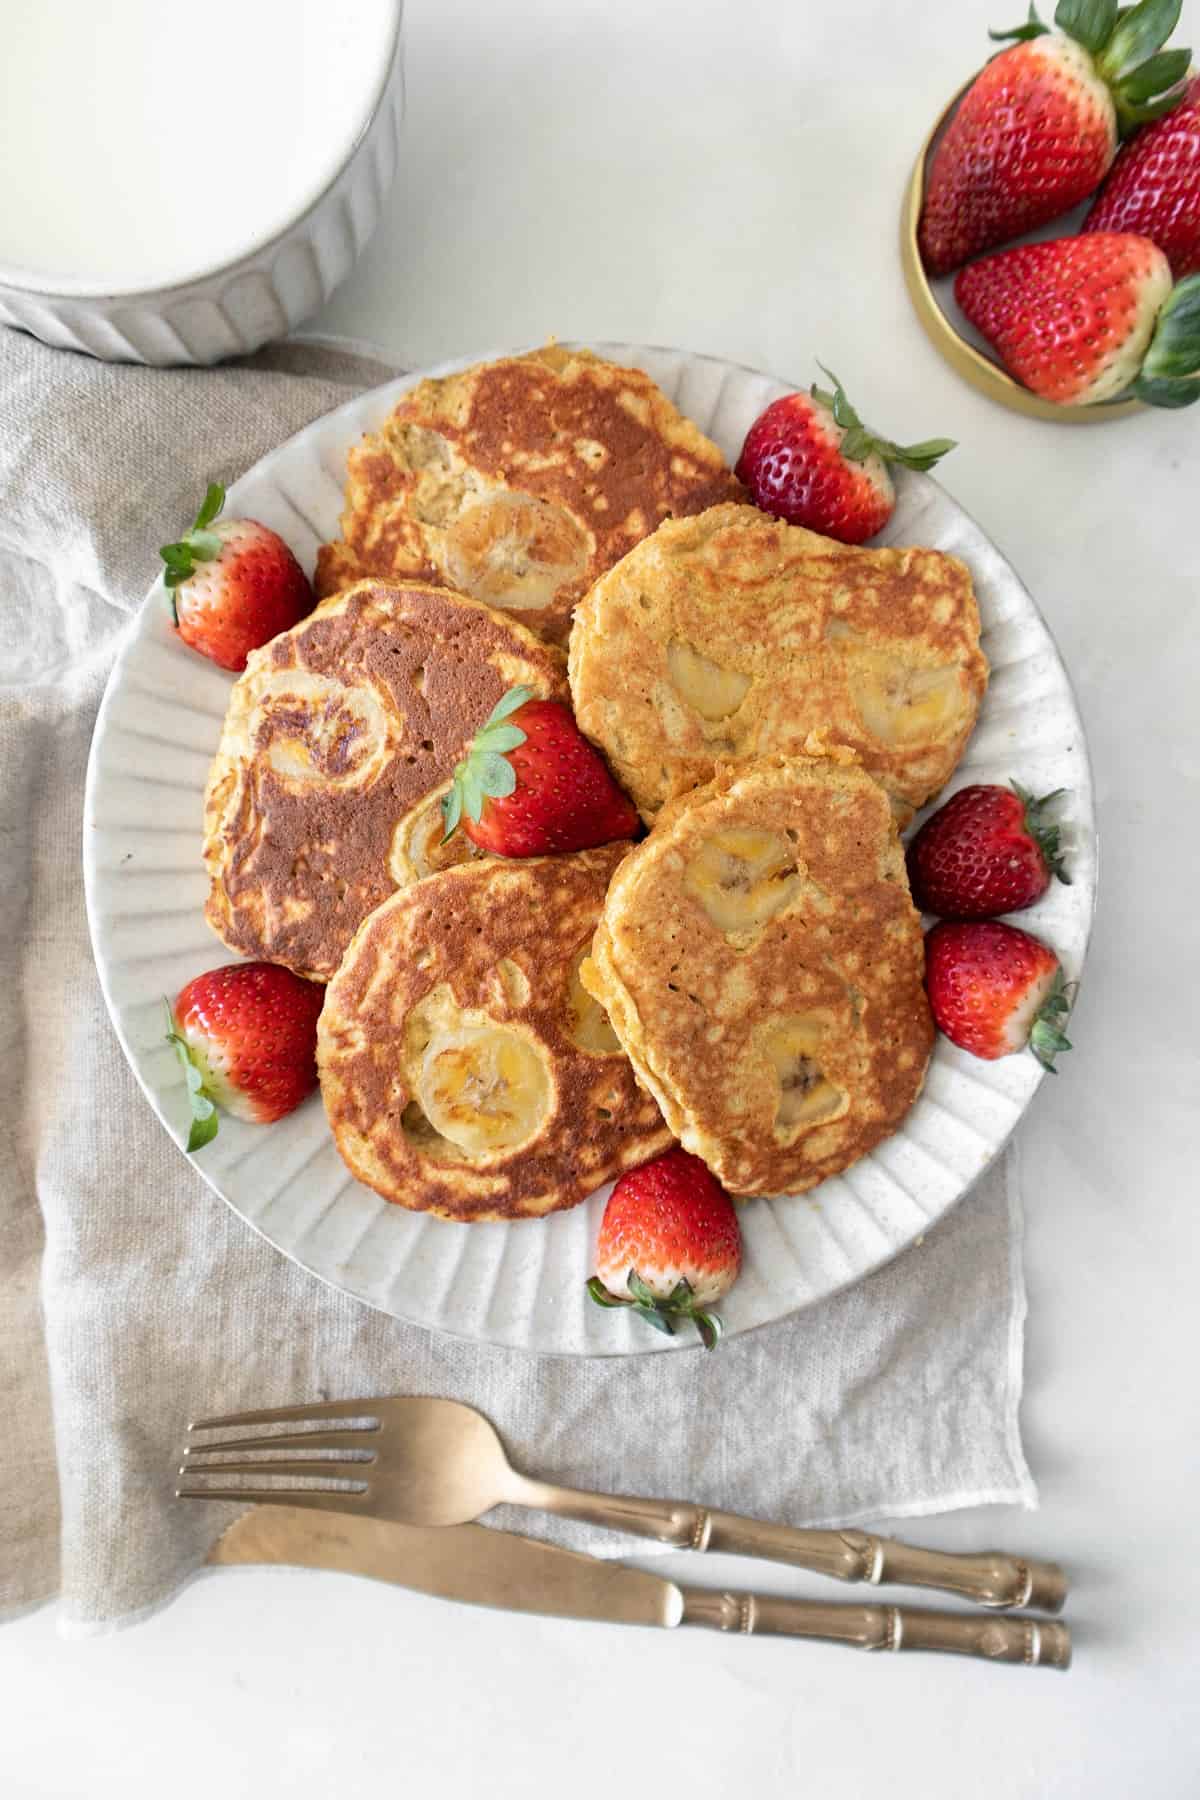 coconut flour banana pancakes with strawberries